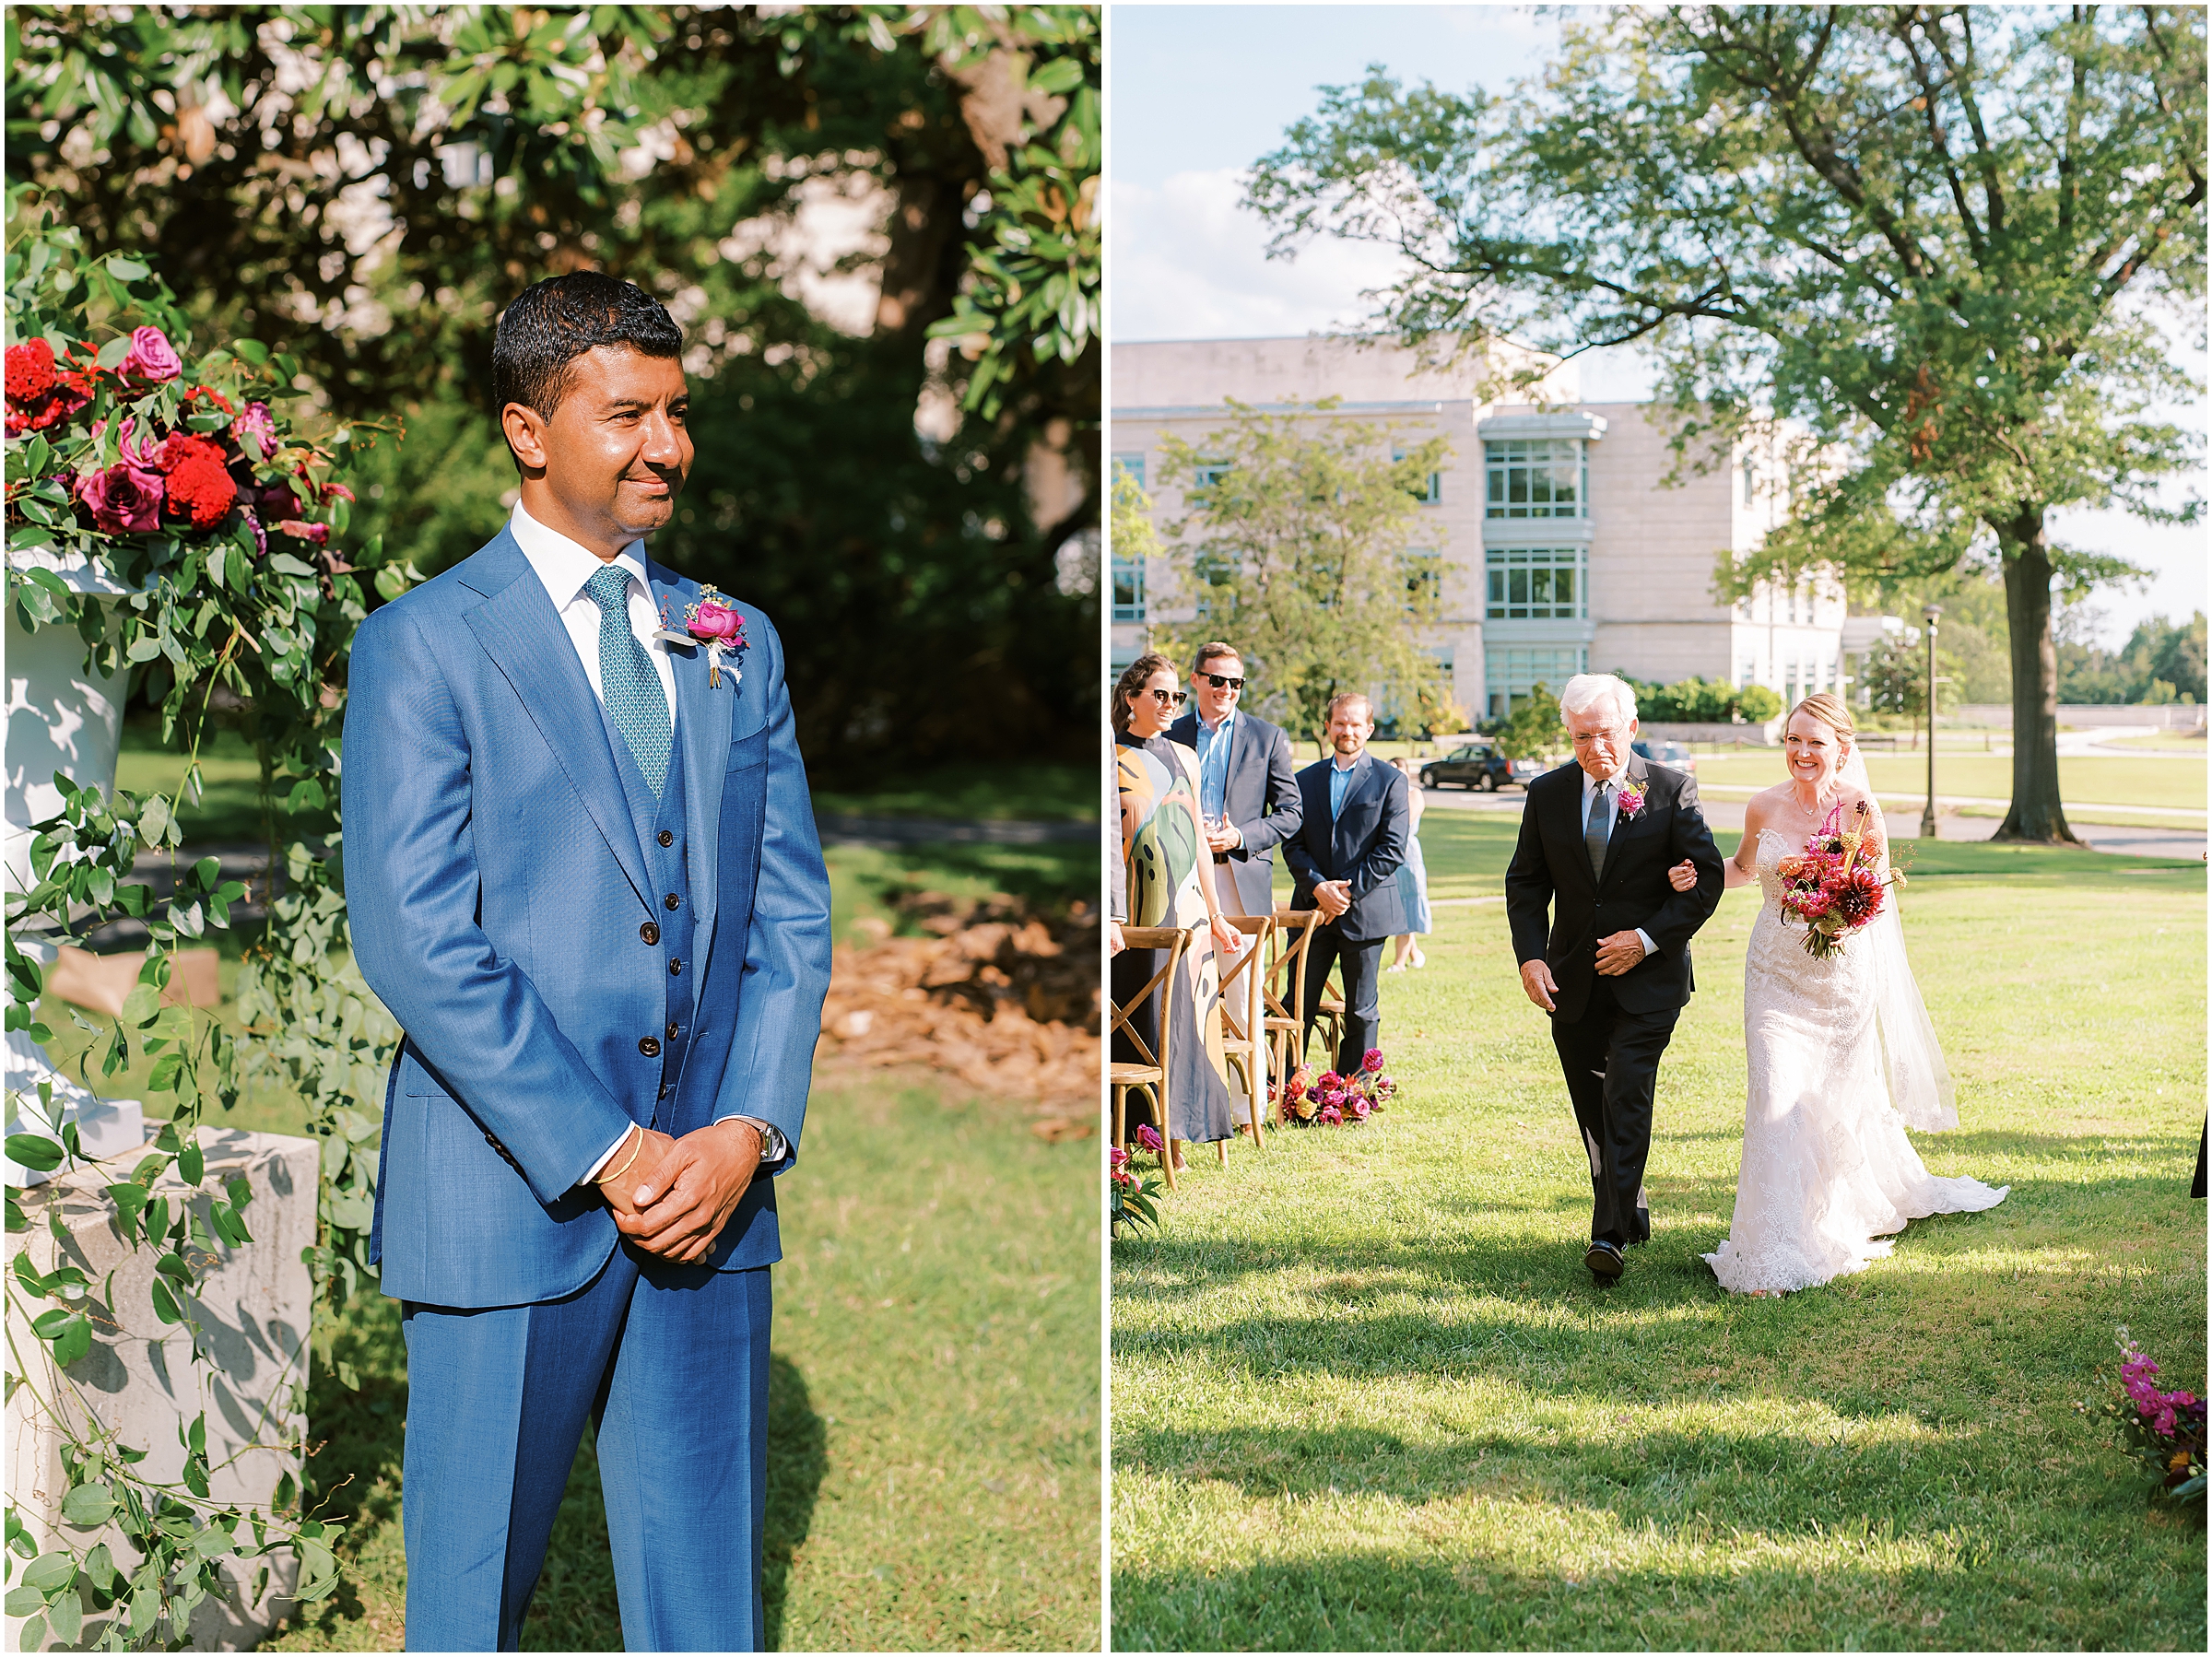 Groom's reaction to bride and father walking down the aisle